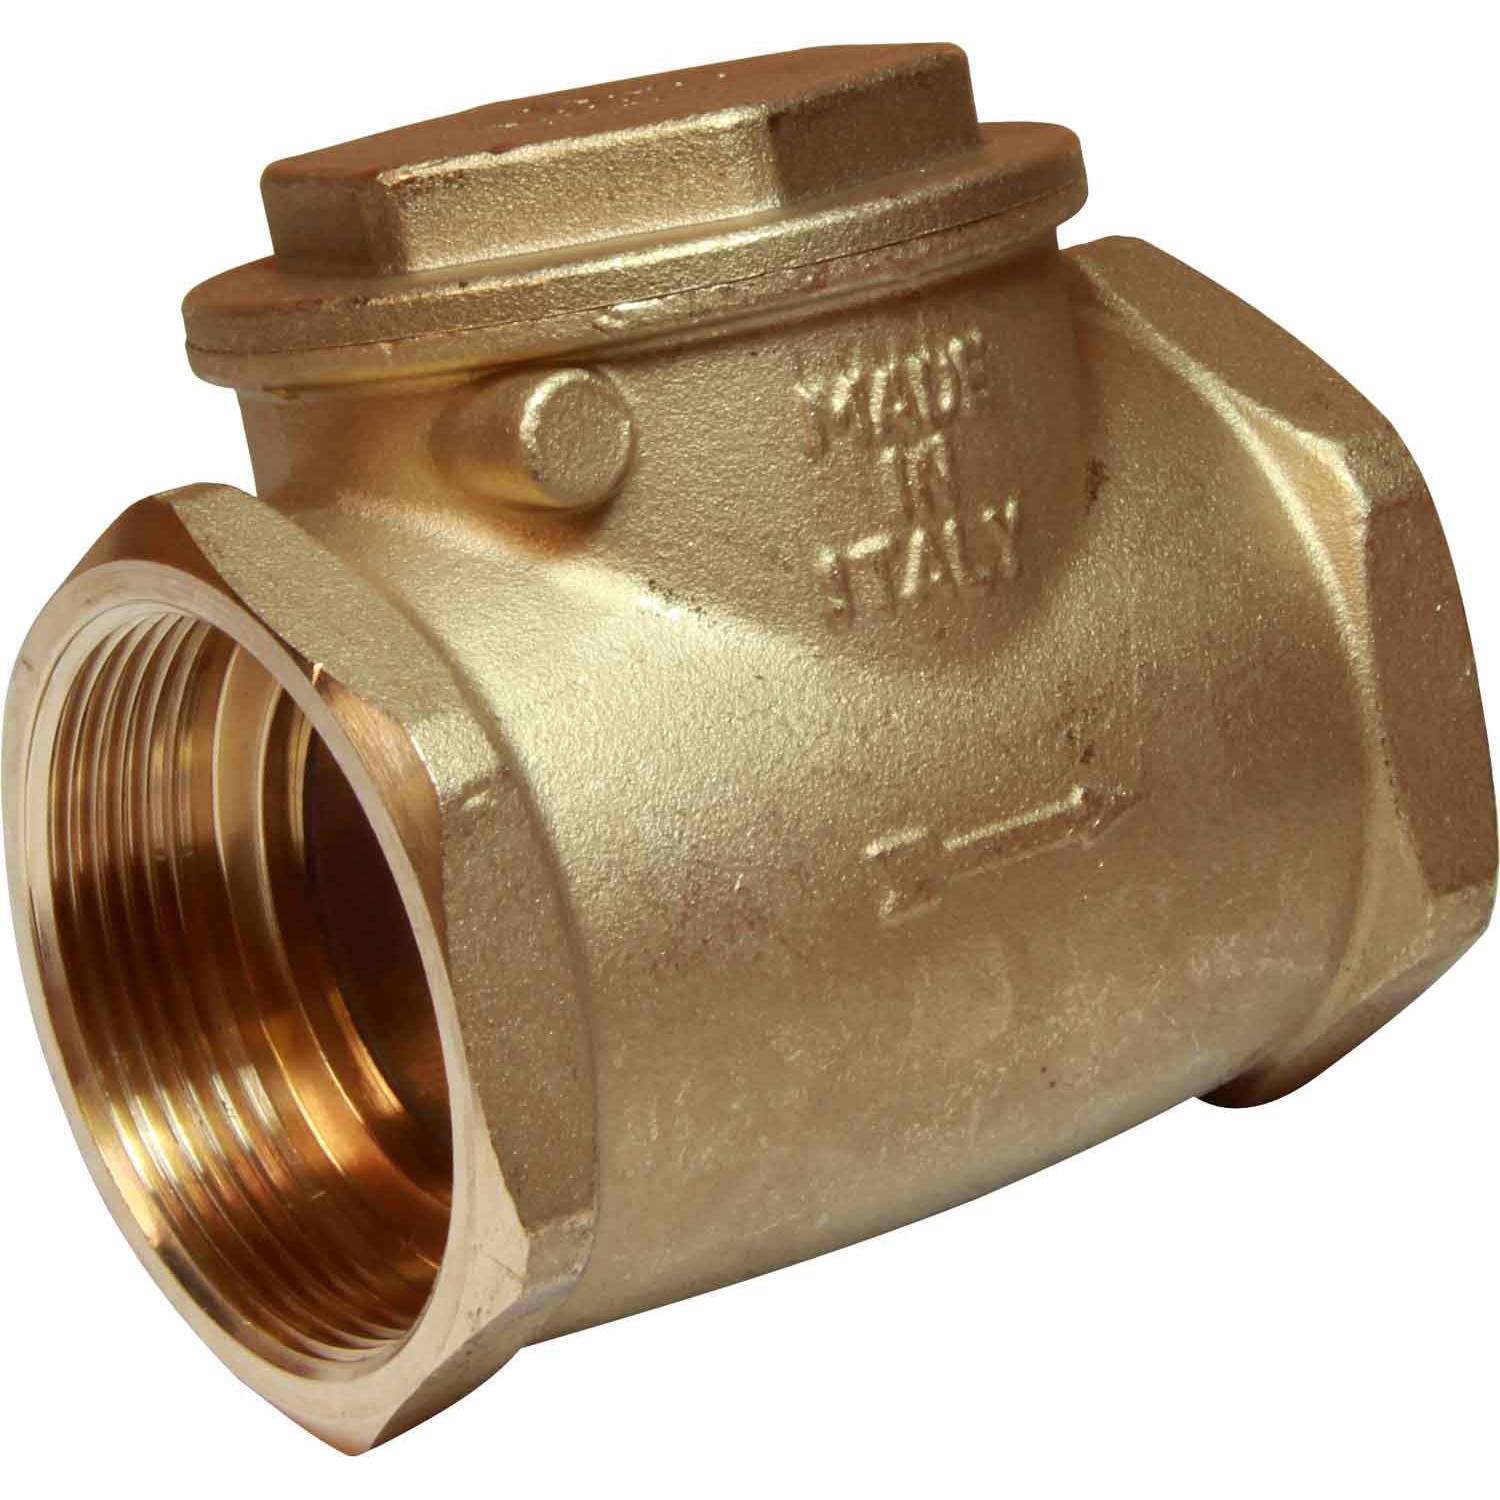 CDI Control Devices Brass Check Valve P2525-1WA Pack of 2 